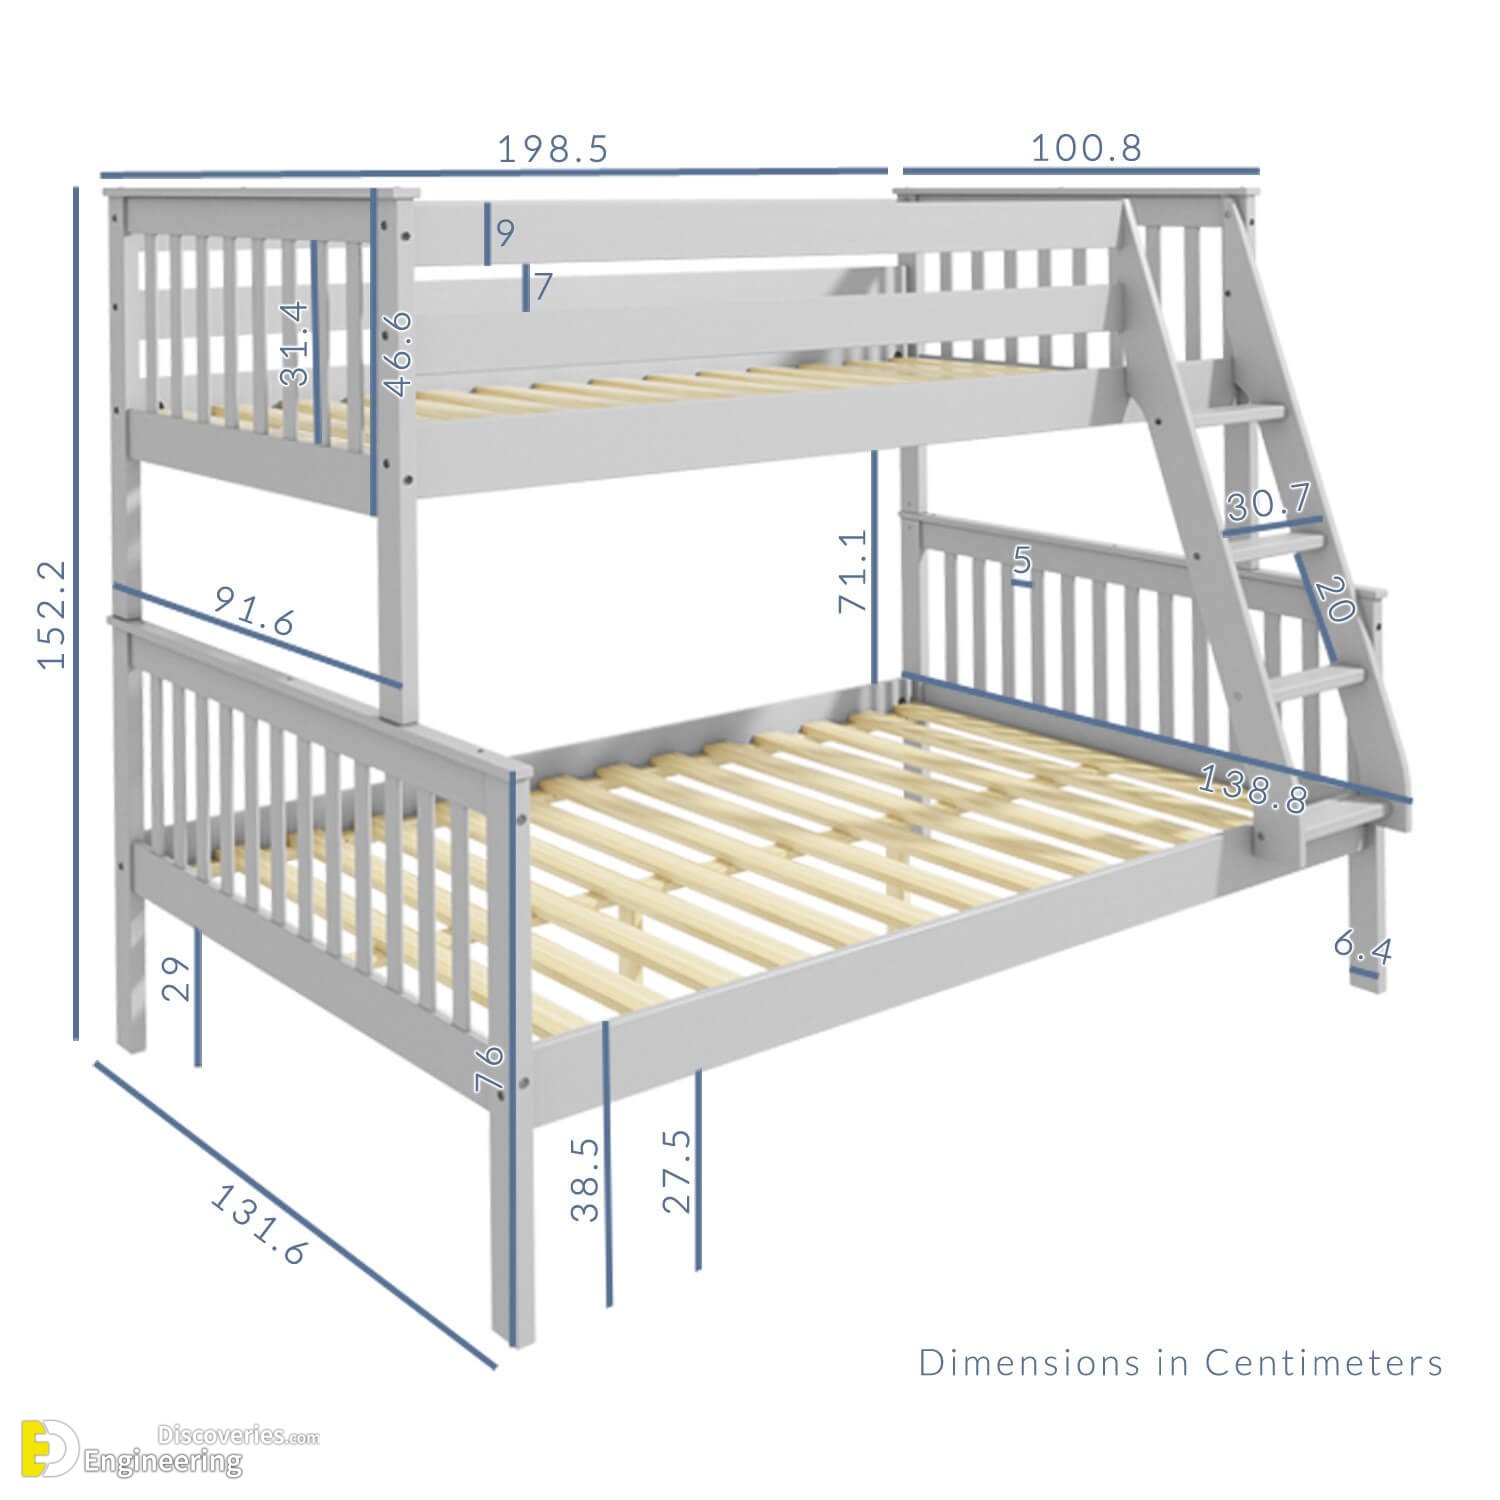 Amazing Bunk Bed Designs With Dimension, Double Bunk Bed Dimensions